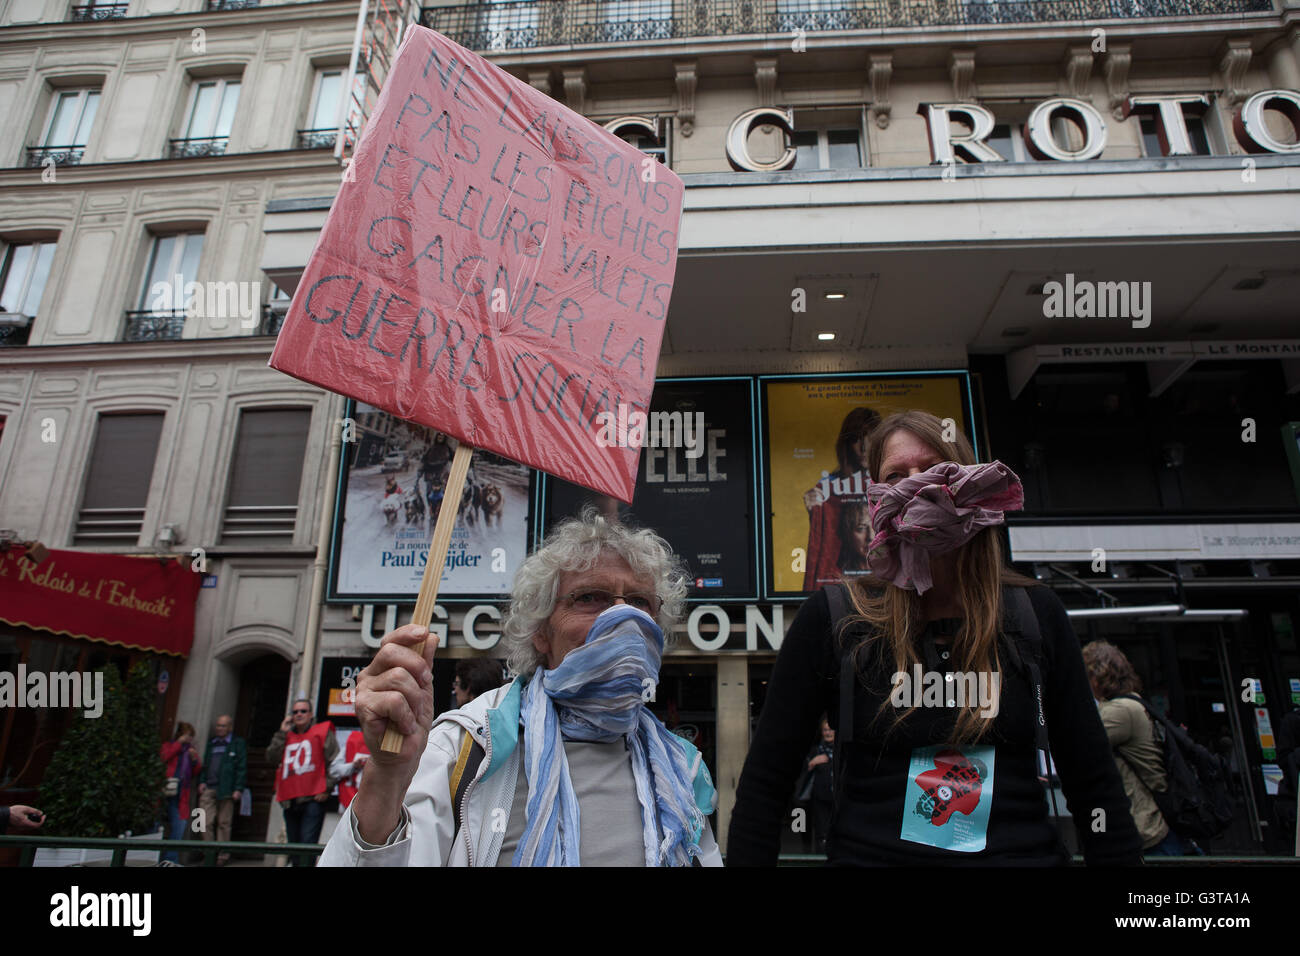 Despite some clashes with police, many protesters marched peacefully to objuect to potential changes in France's labour laws. Photo: JoSyz/Alamy Live News Stock Photo